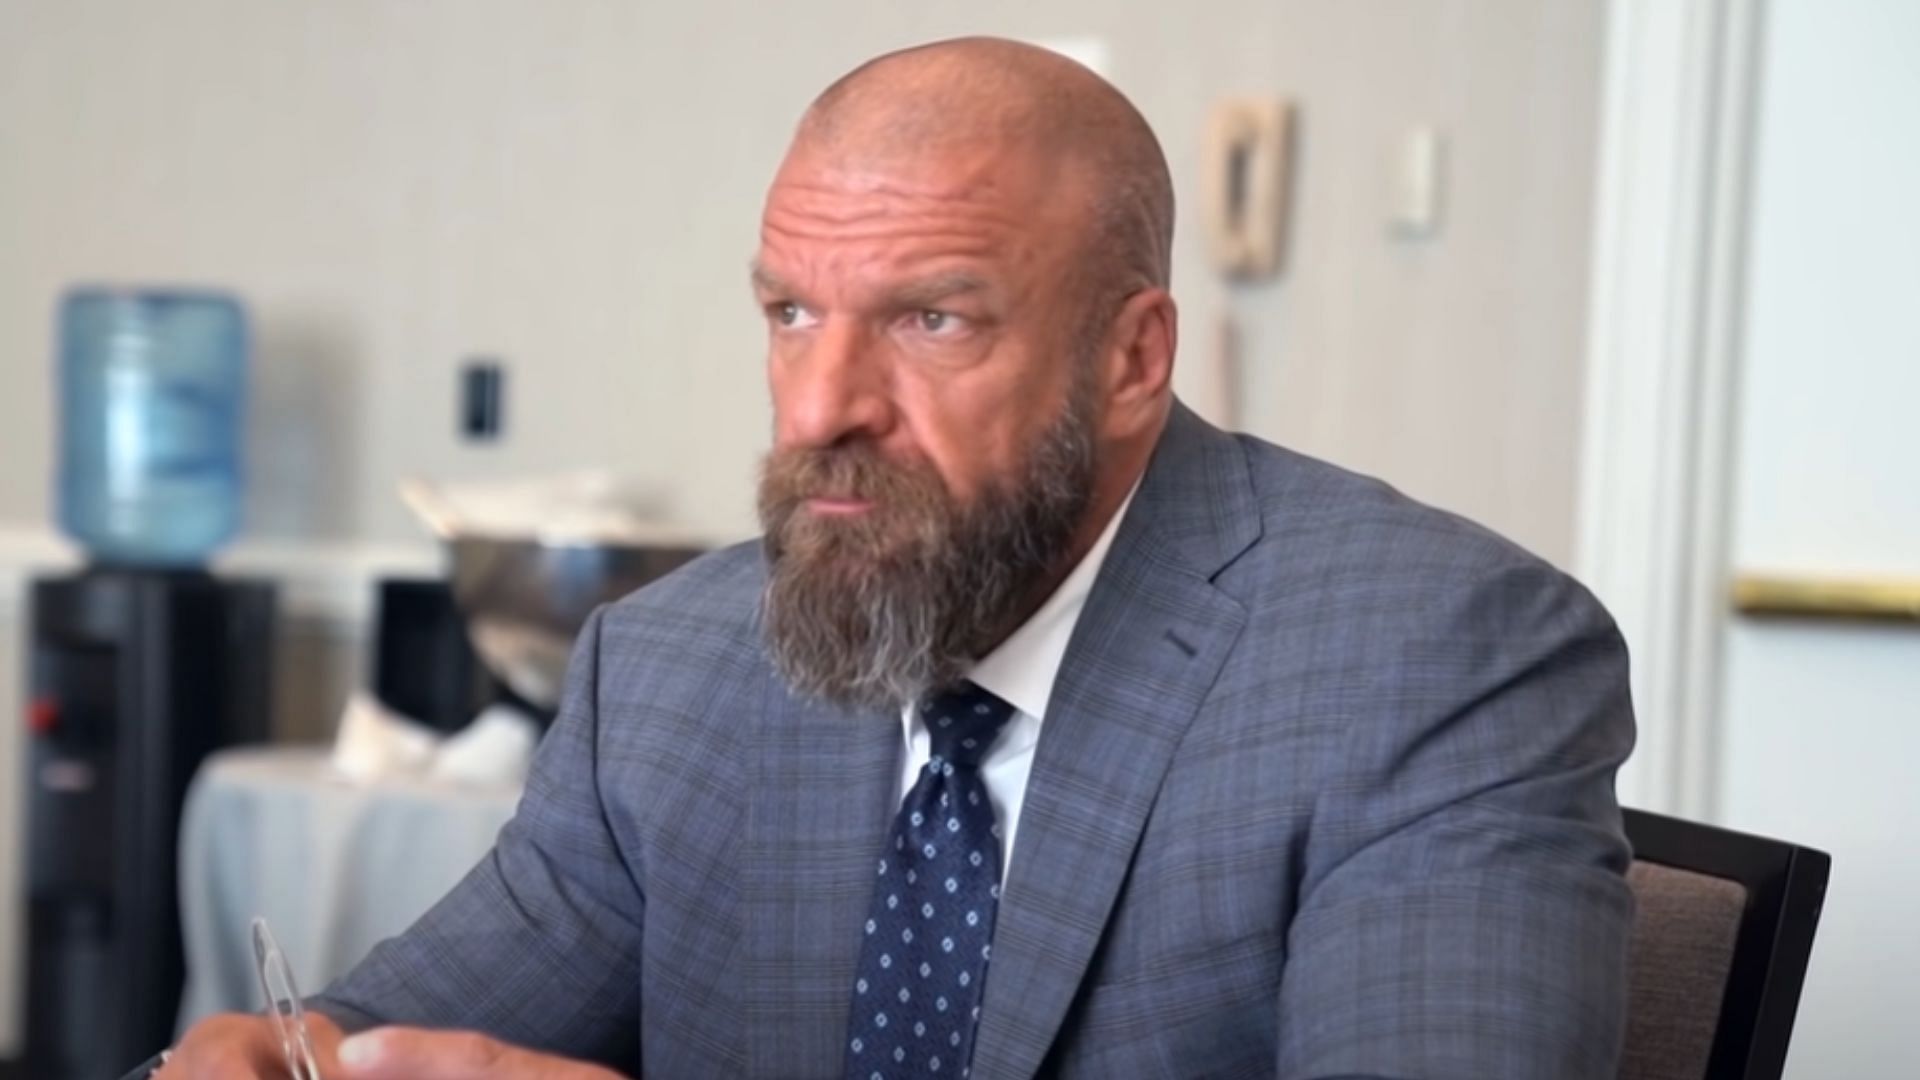 Triple H discussed Money in the Bank after the show